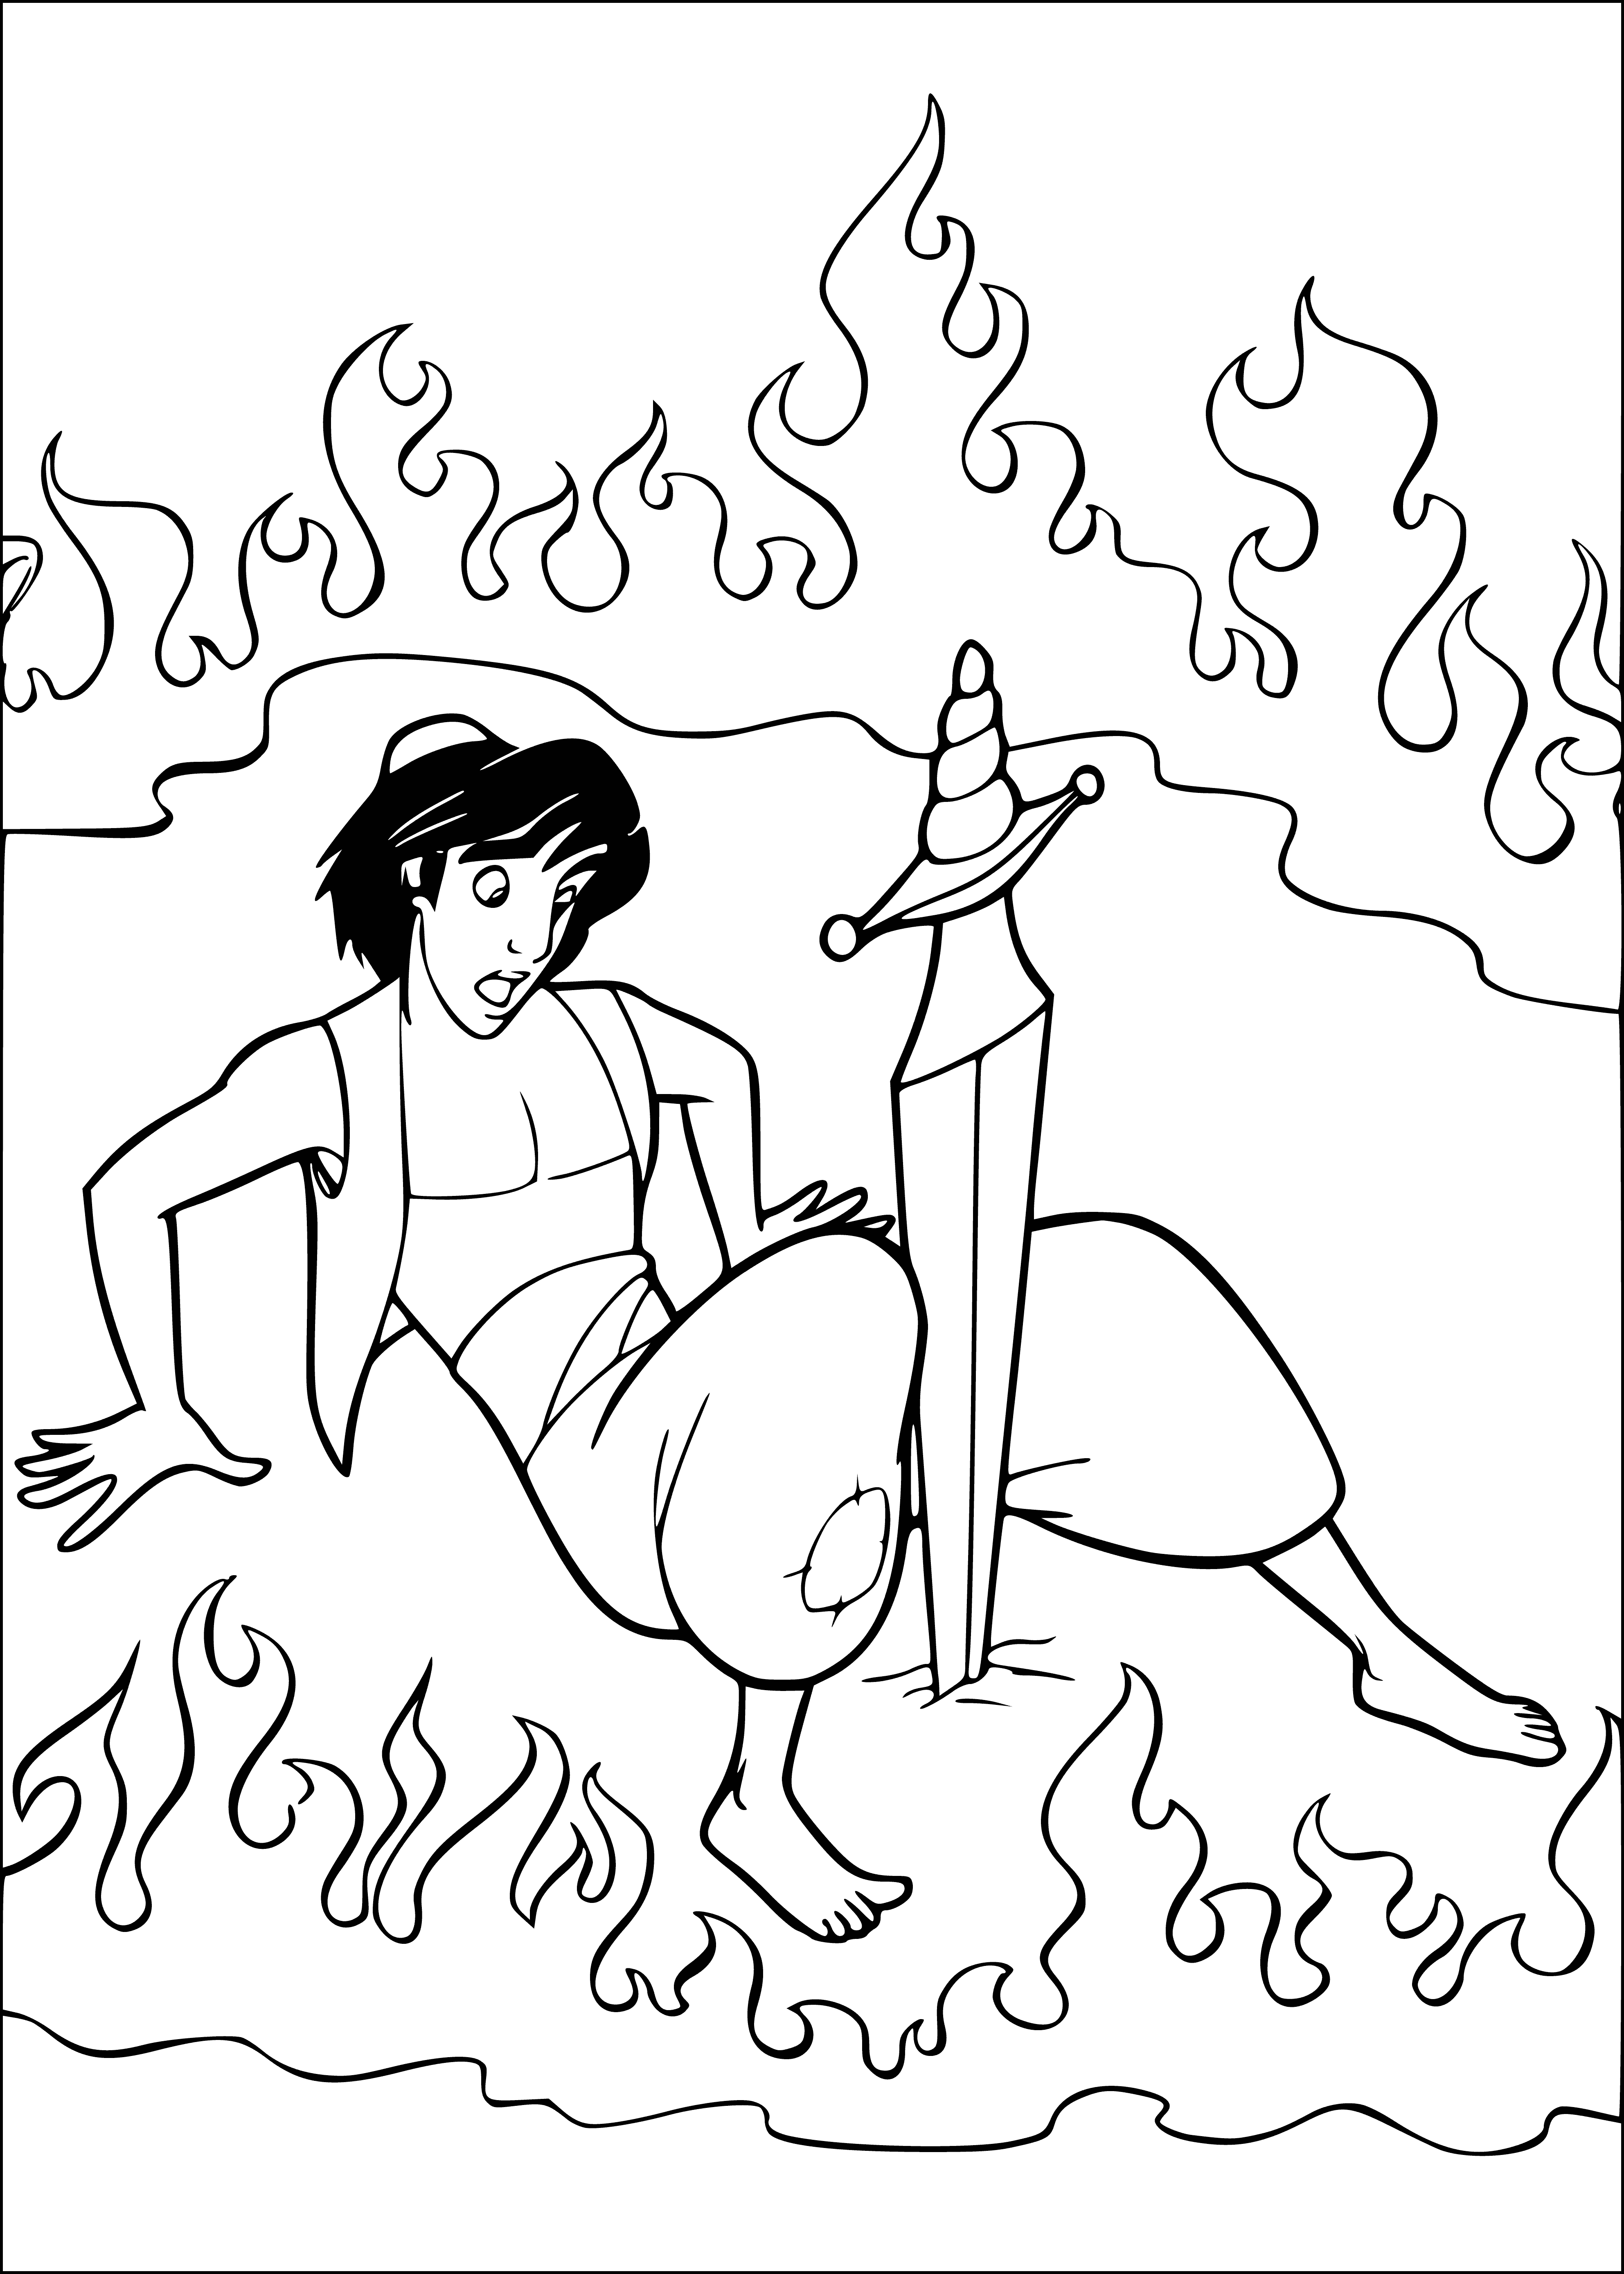 coloring page: Aladdin leaps with flaming sword, his clothes and hair burning. He looks determined, ready to fight, unaffected by the fire. #Aladdin #ColoringPage